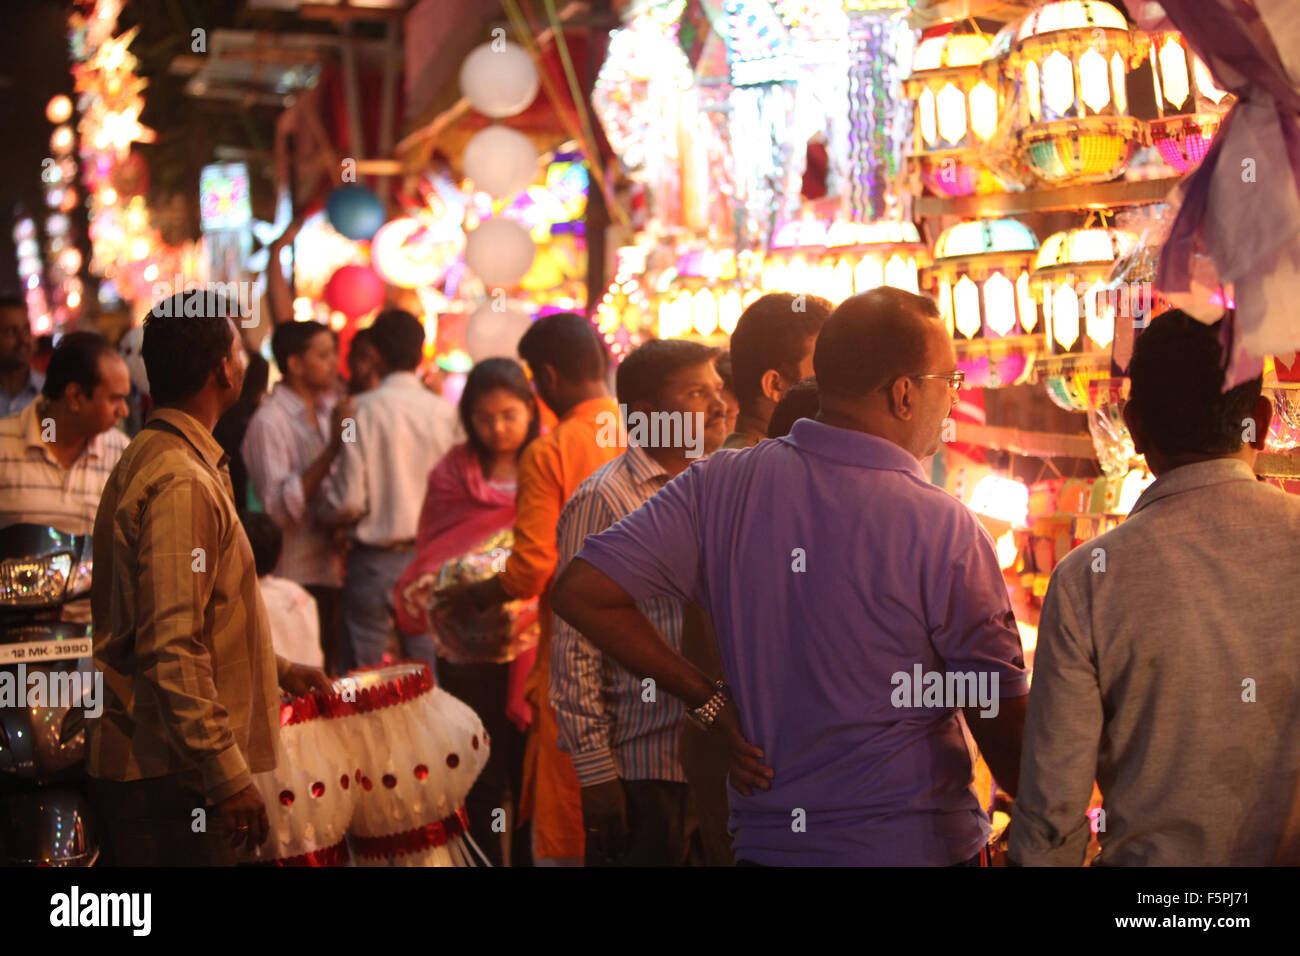 Pune, India - November 7, 2015: People in India shopping for sky lanterns on the occasion of Diwali festival in India Stock Photo